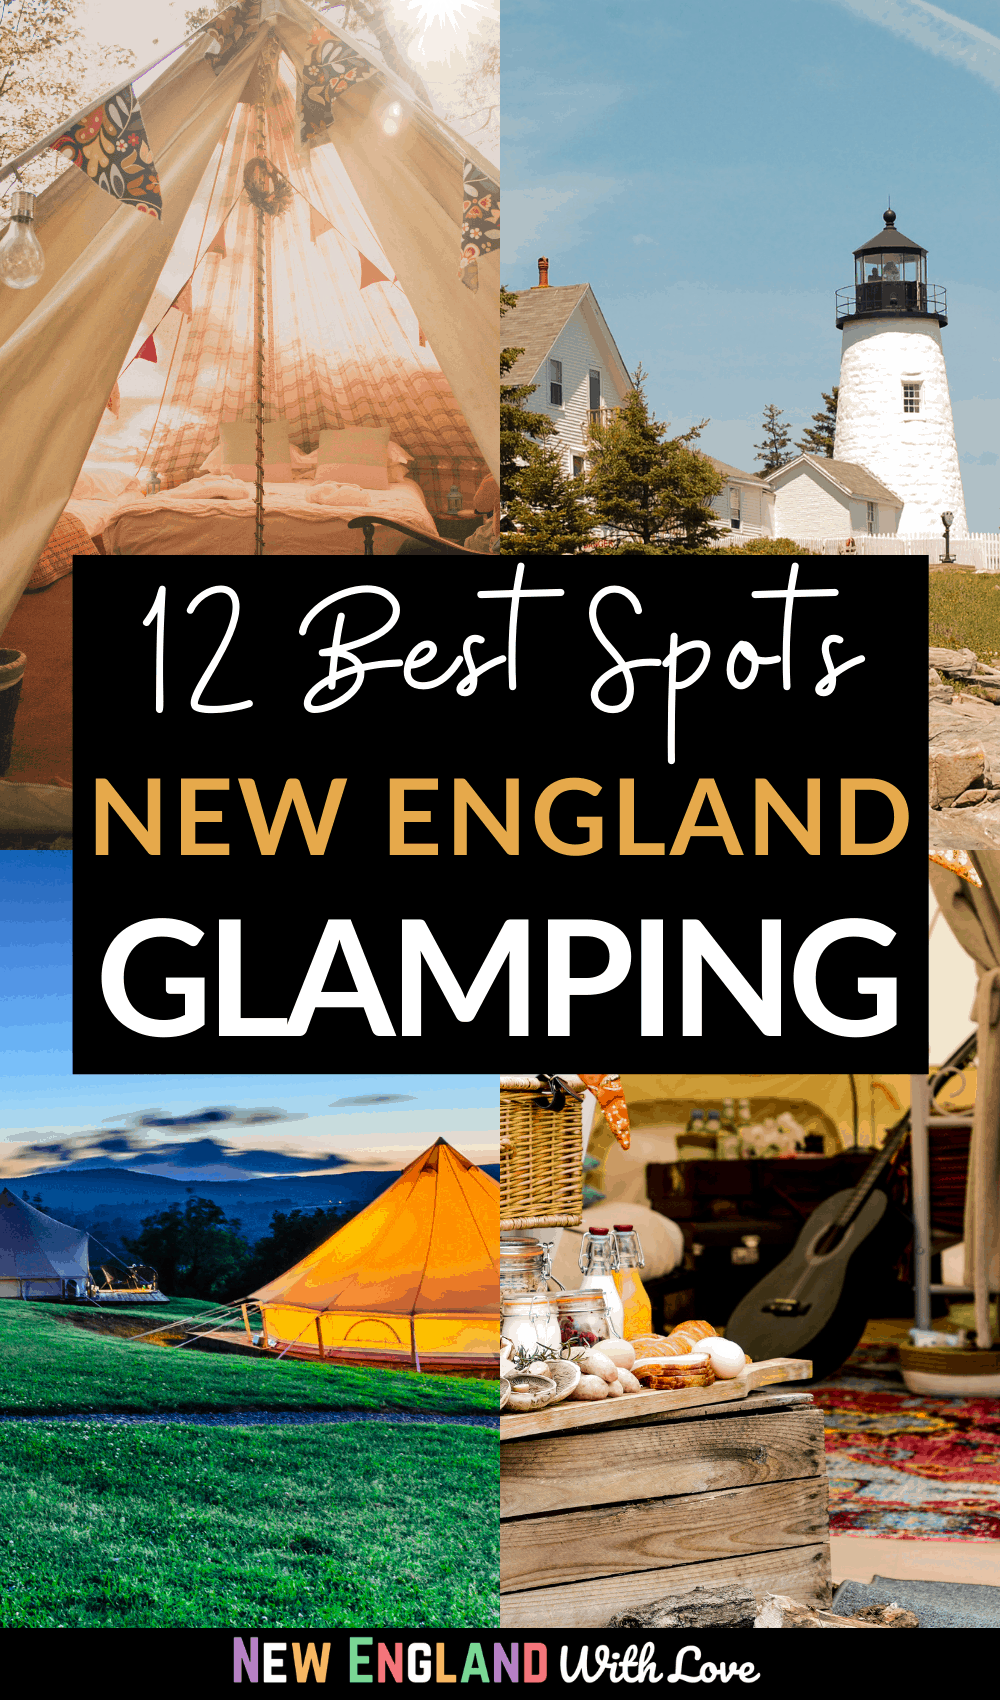 A Pinterest graphic reading "12 Best Spots NEW ENGLAND GLAMPING"